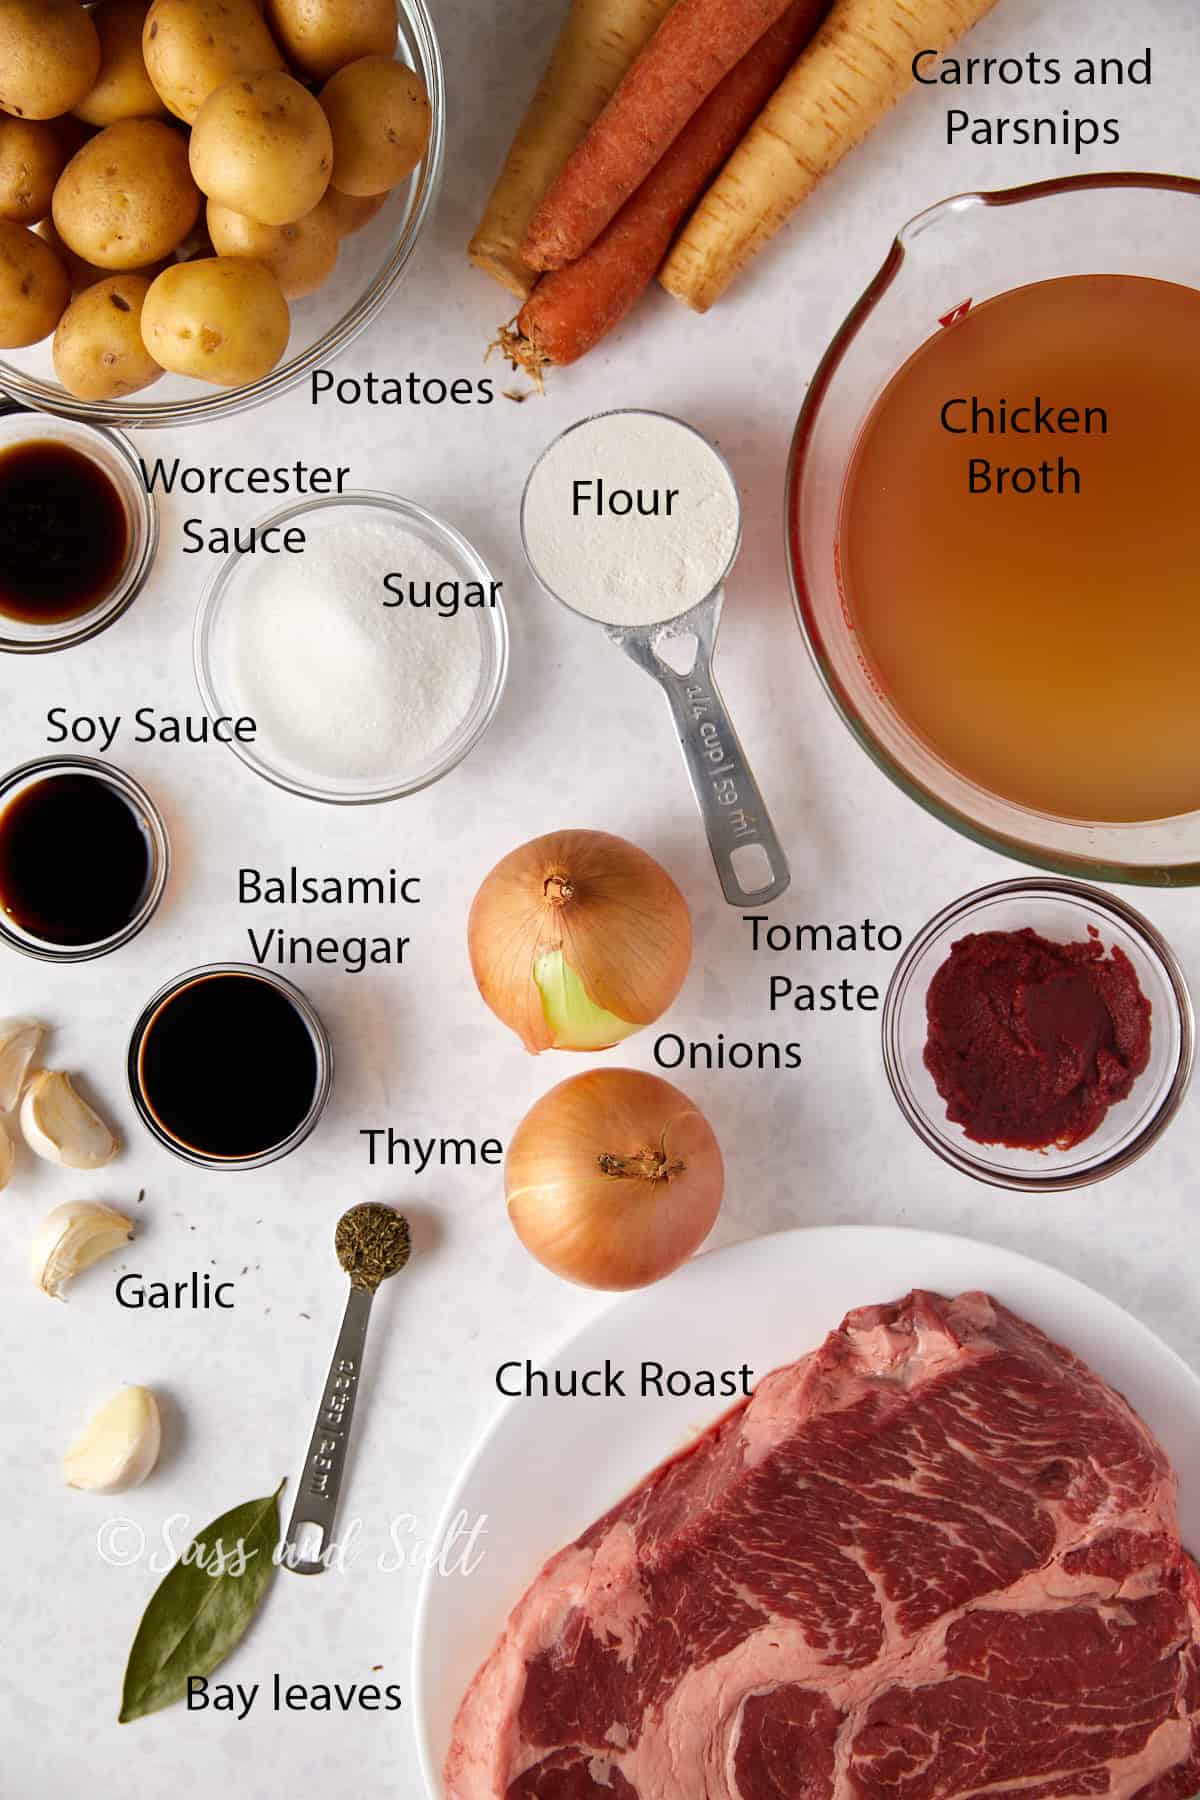 This photo depicts an array of ingredients laid out on a light surface, each labeled for a beef stew recipe. From the top left corner, there is a bowl of small potatoes, followed by carrots and parsnips to their right. Below the vegetables, there is chicken broth in a glass measuring cup. To the left of the broth, there are small dishes containing flour and sugar, and below them, Worcester sauce and soy sauce. Moving to the bottom left of the image, garlic cloves and bay leaves sit beside a spoonful of dried thyme. In the center, balsamic vinegar is in a small dish, with two onions to its right and a can of tomato paste above. Dominating the bottom right of the image is a large piece of chuck roast on a white plate. The photo is watermarked with "Sass and Salt."